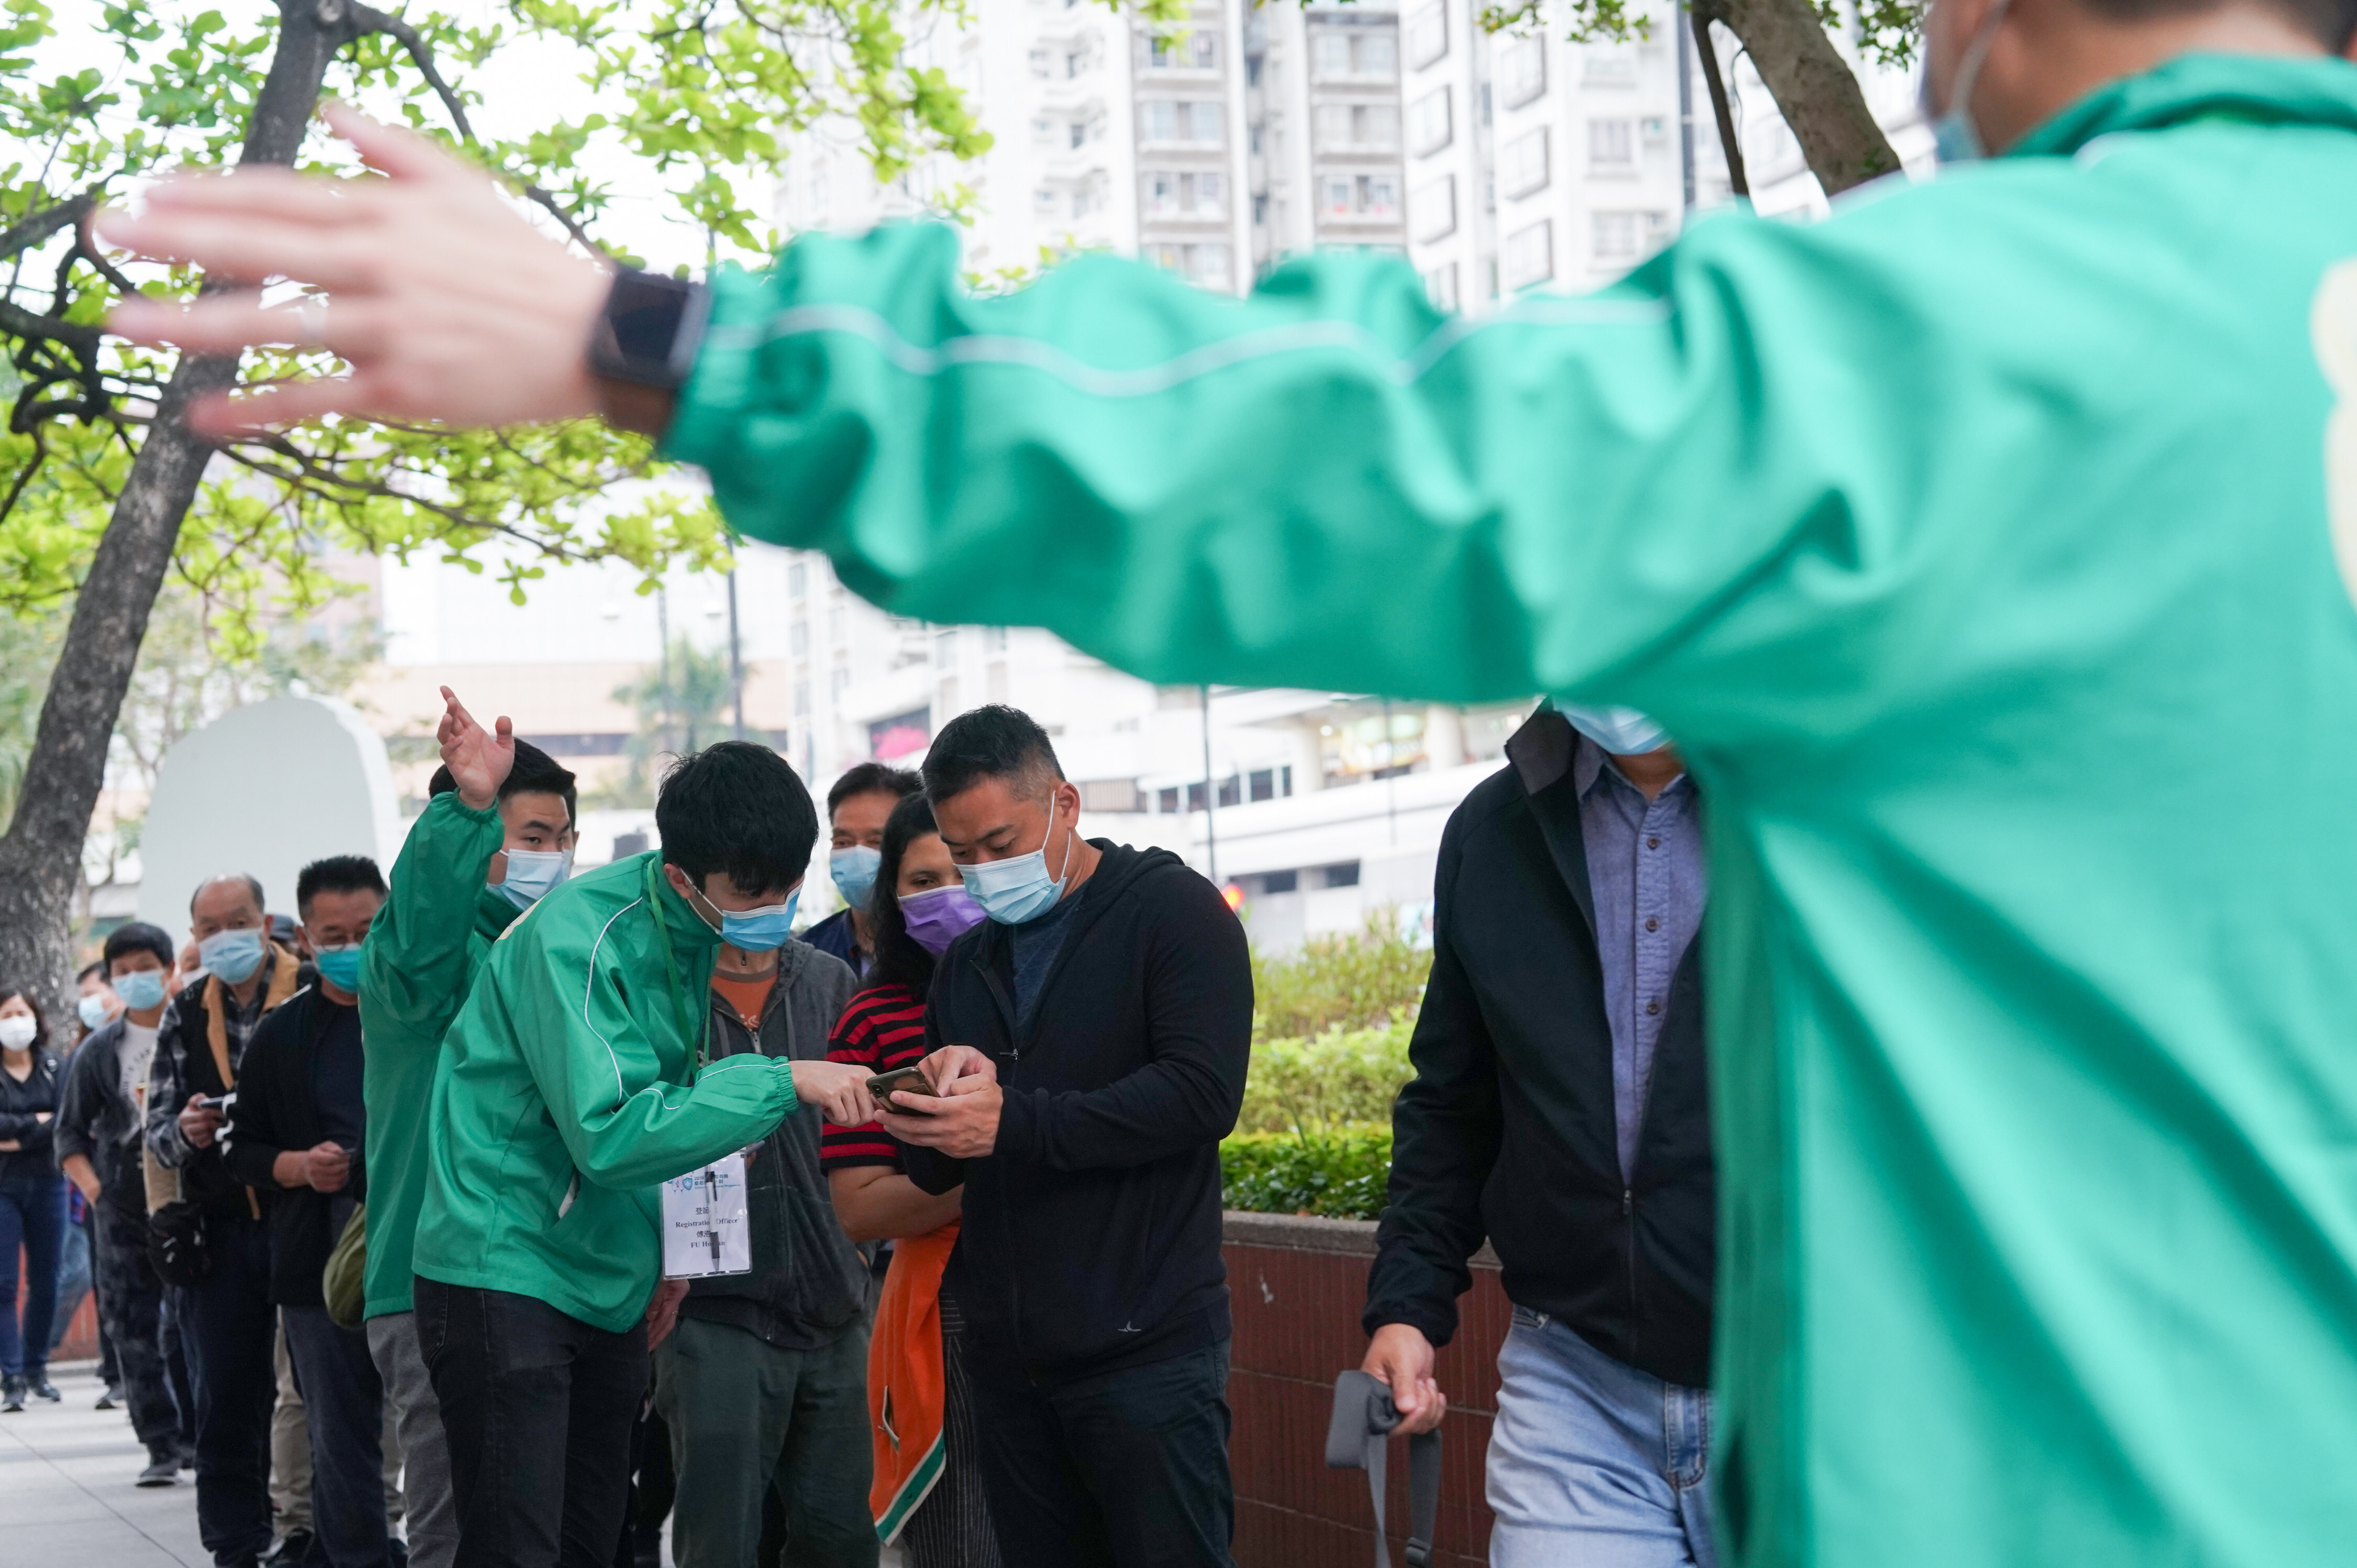 Workers manage the queue outside the Sha Tin Community Vaccination Centre on March 27. Photo: Felix Wong